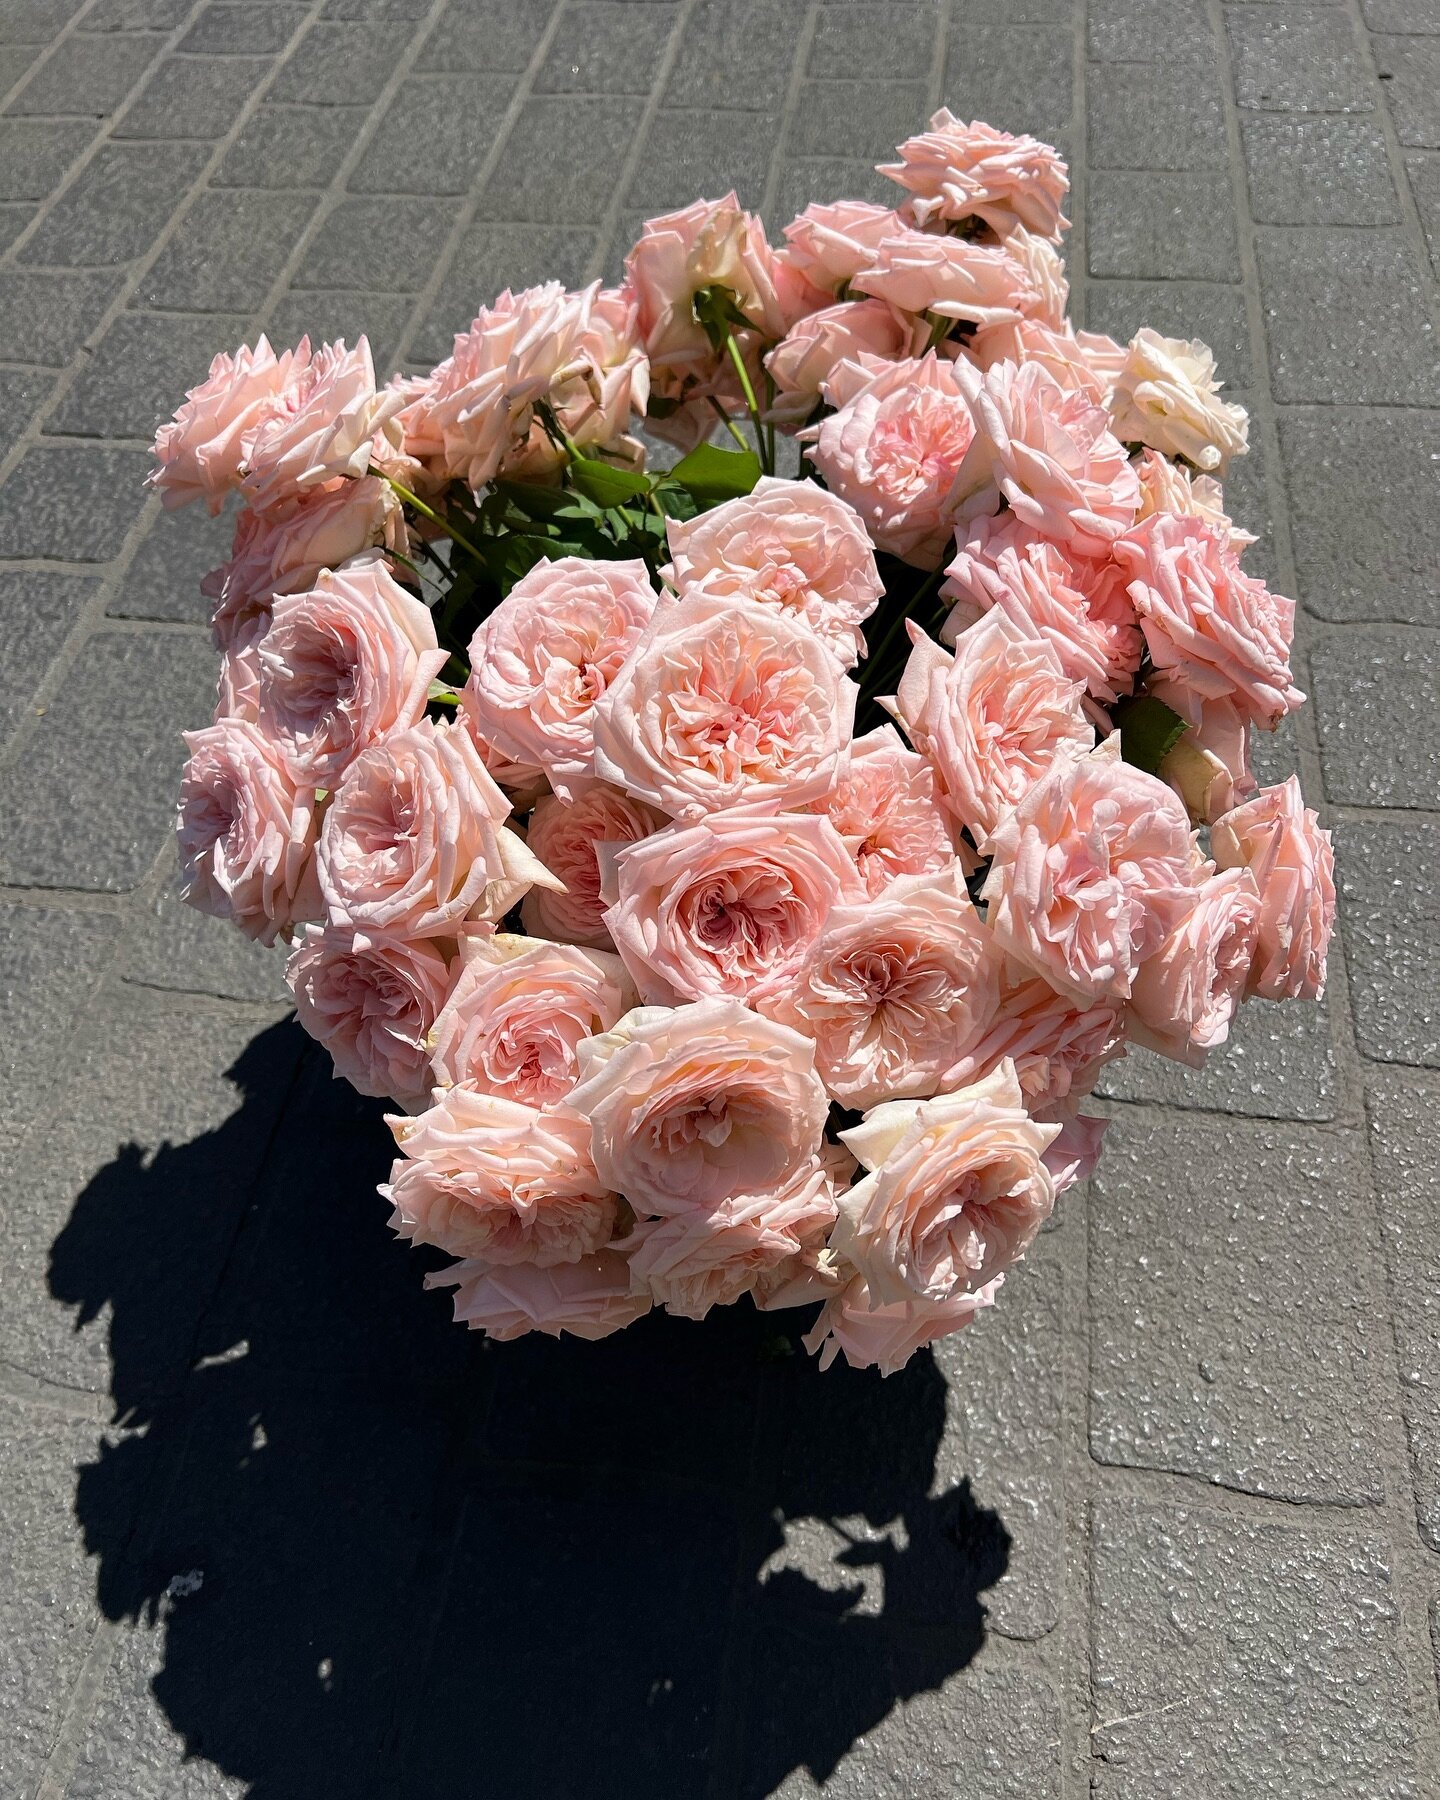 If only you could smell these 🌹🌹🌹❤️&zwj;🔥

It&rsquo;s a hot day today so our job is keeping all our beauties alive for tomorrows wedding. 

Hope you all have a glorious day ! X